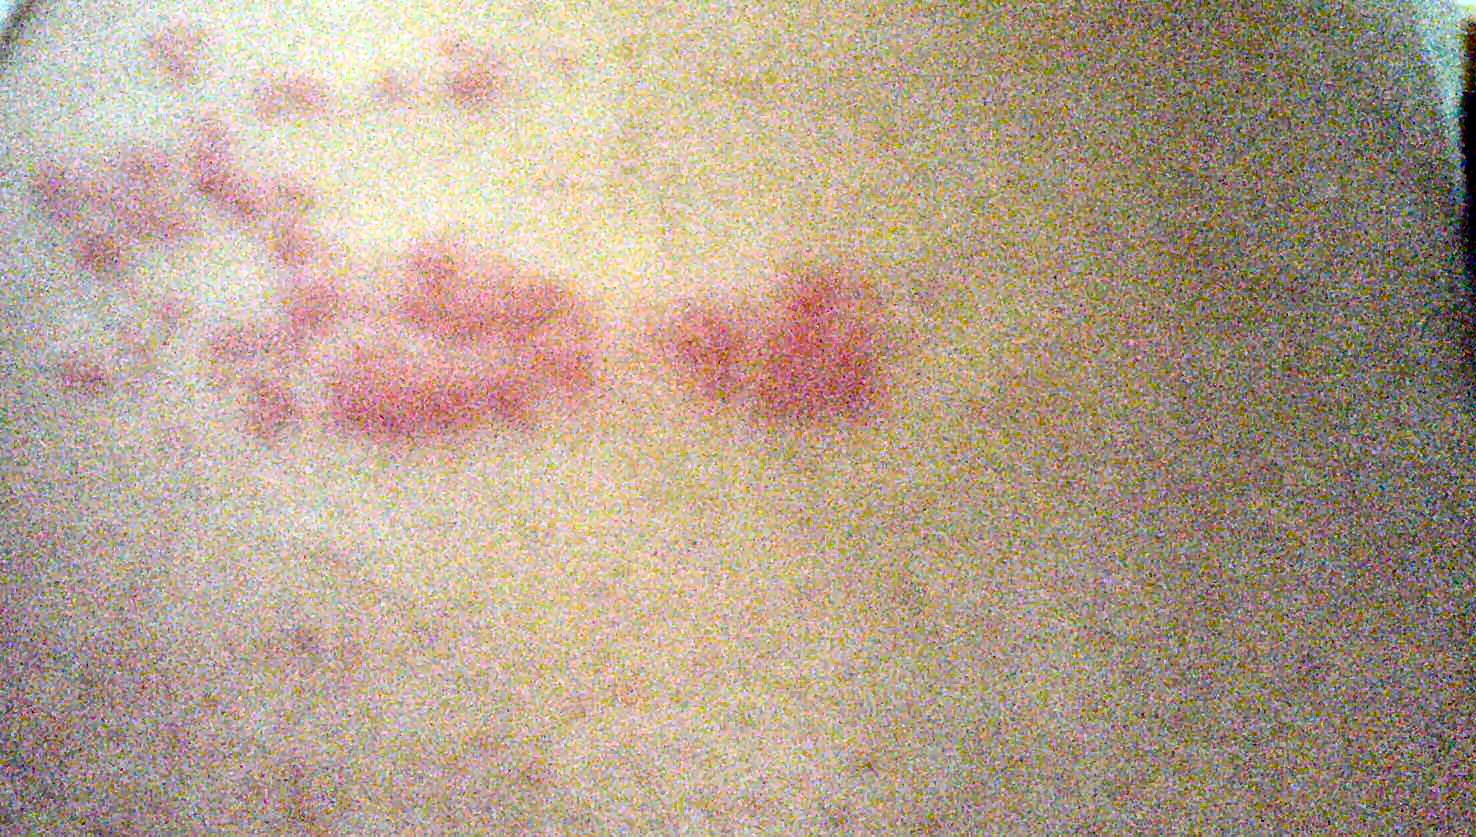 Herpes zoster blisters day 1